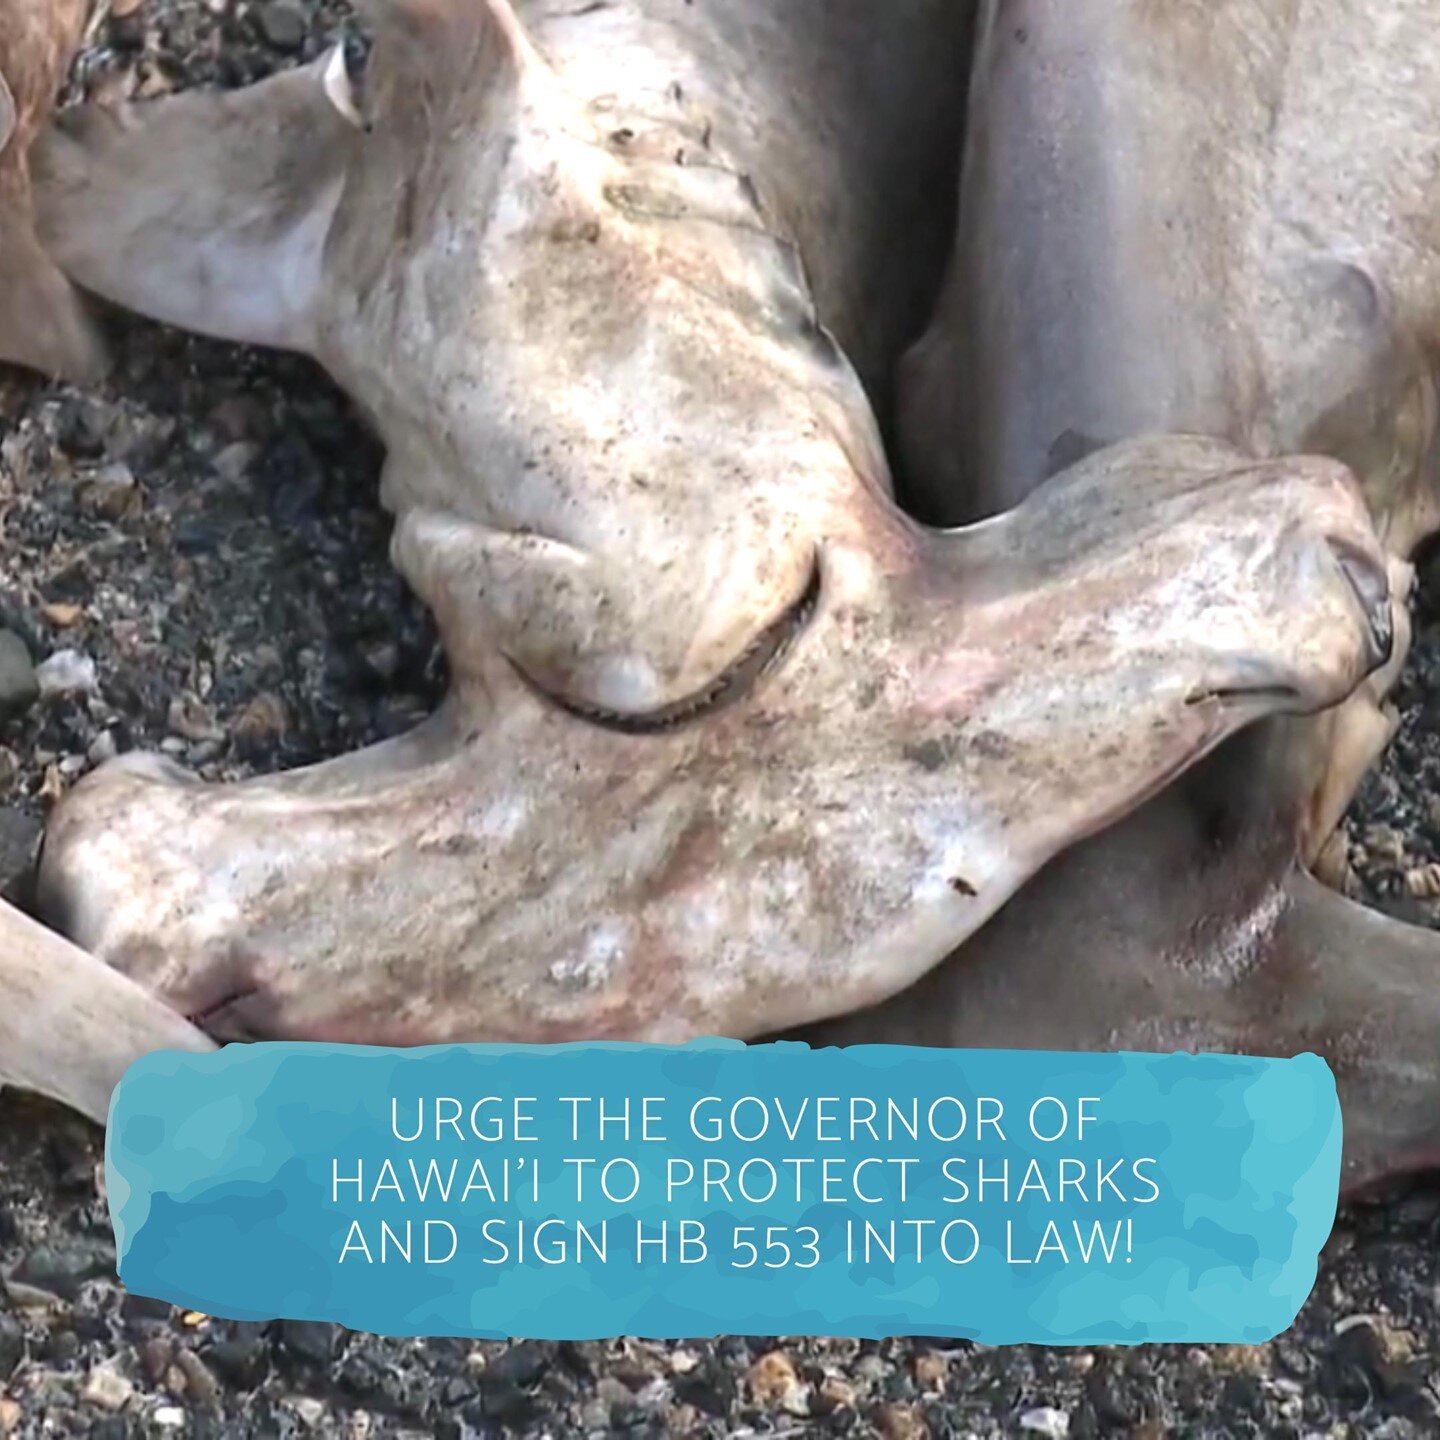 Over the years, there have been far too many incidents of purposeful killings and mutilations of sharks in Hawai'i. Dead shark pups have been found tossed in bushes, a pile of nearly a hundred scalloped hammerhead pups were dumped at Sand Island, sha